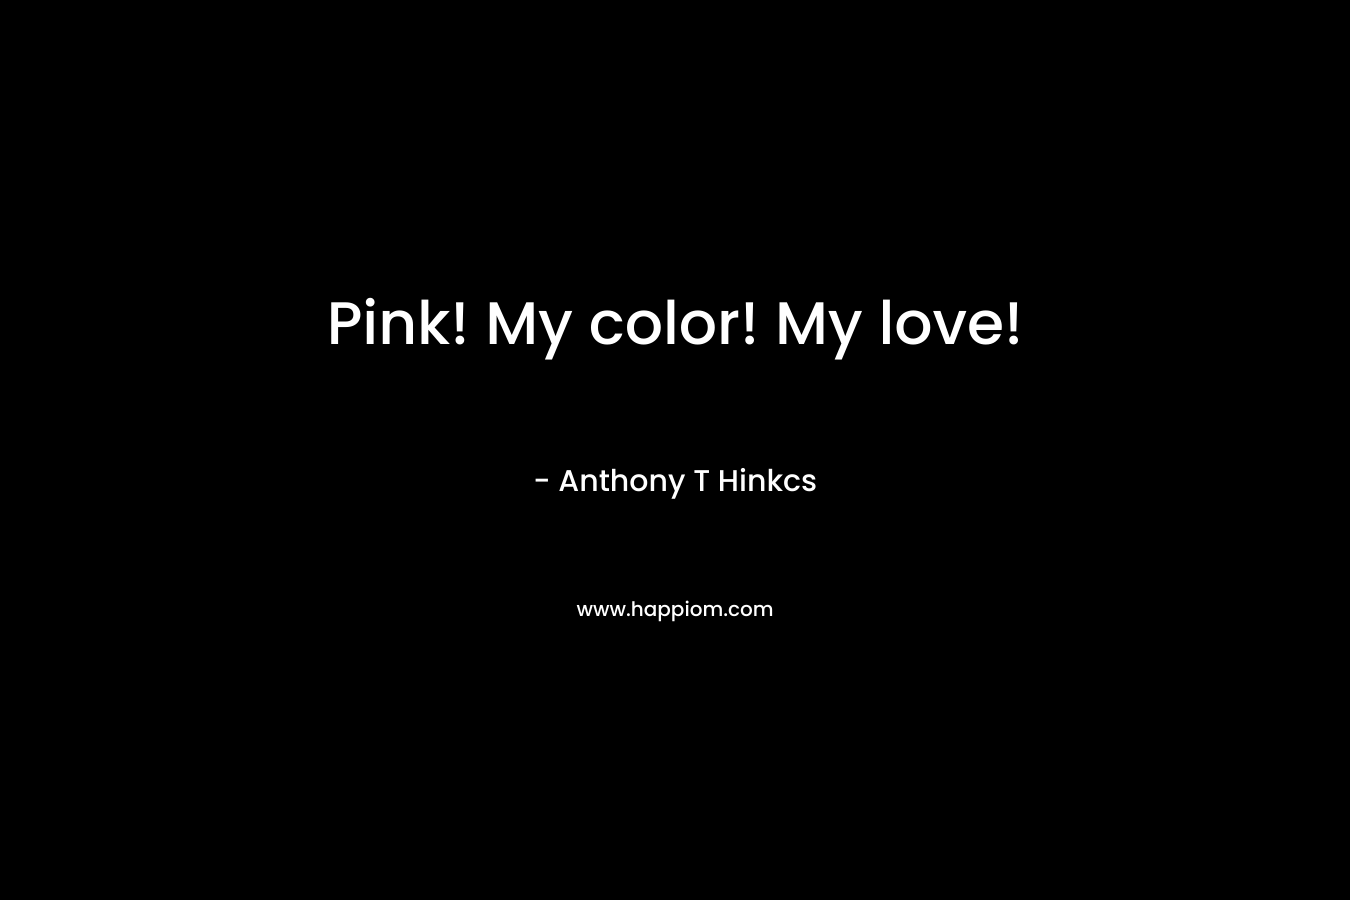 Pink! My color! My love!